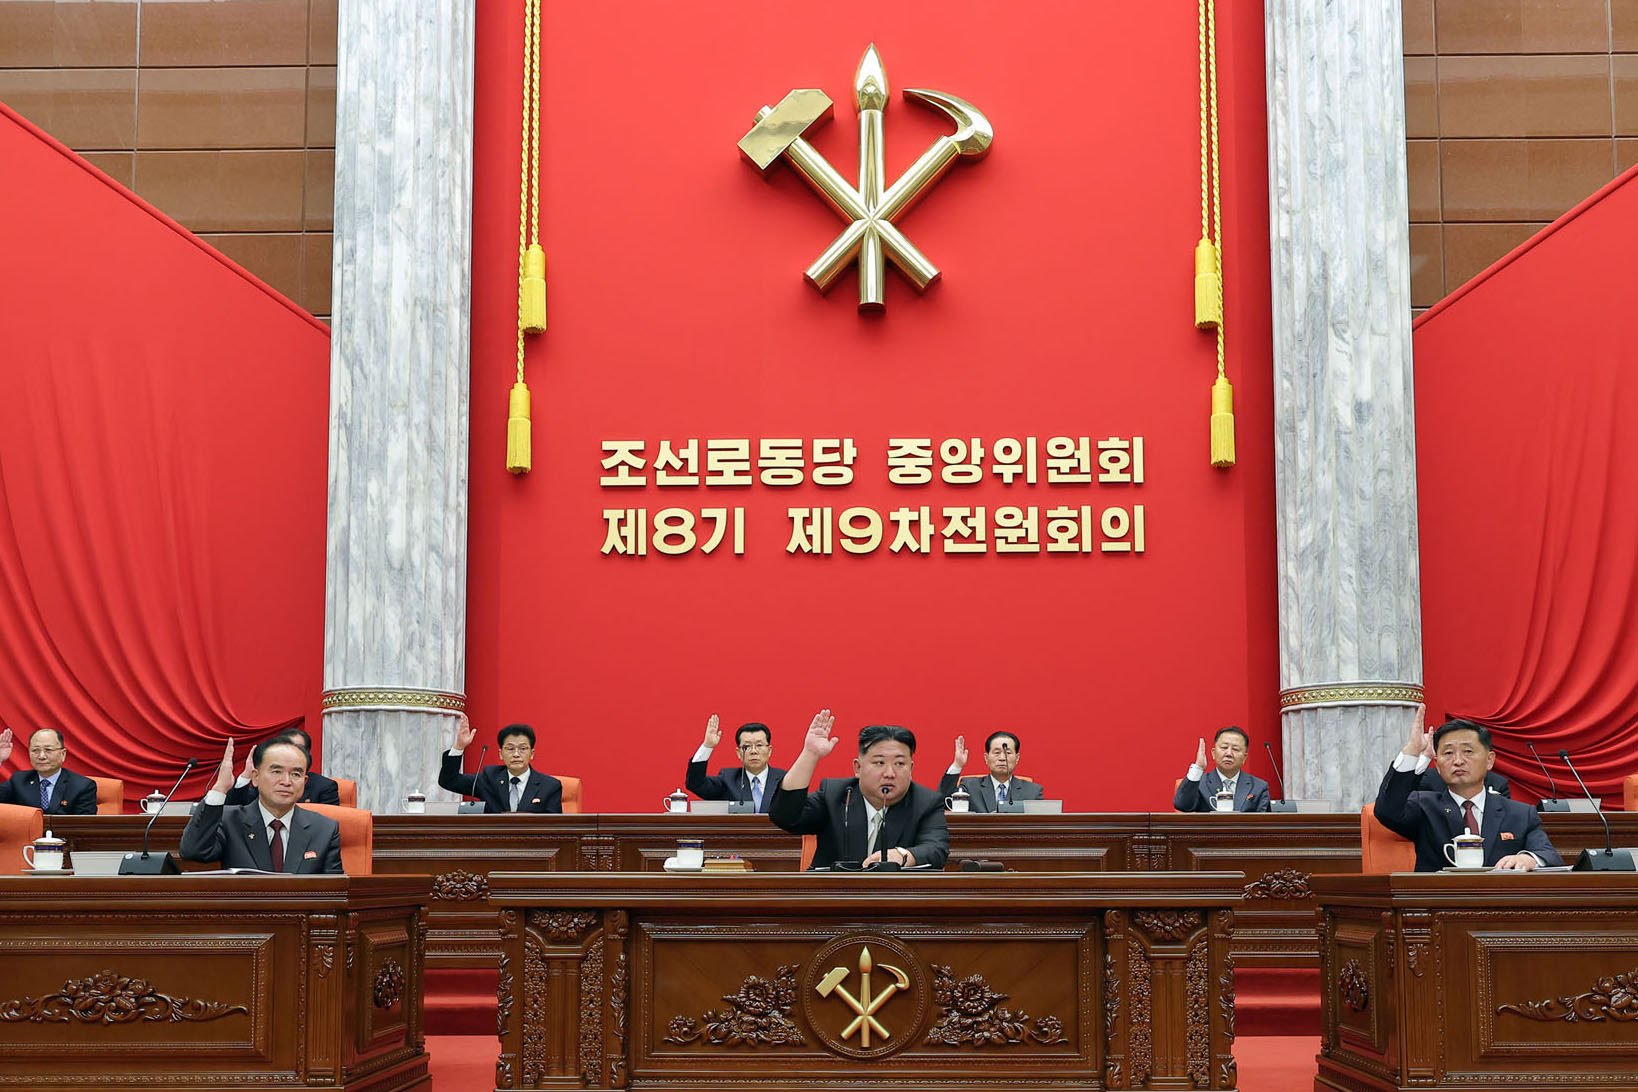 North Korea’s leader Kim Jong-un attends the ninth plenary session of the eighth Central Committee of the ruling Workers’ Party of Korea at the headquarters of the party’s Central Committee. Pyongyang has repeatedly blamed the Seoul government for the deterioration in relations in the past. Photo: dpa